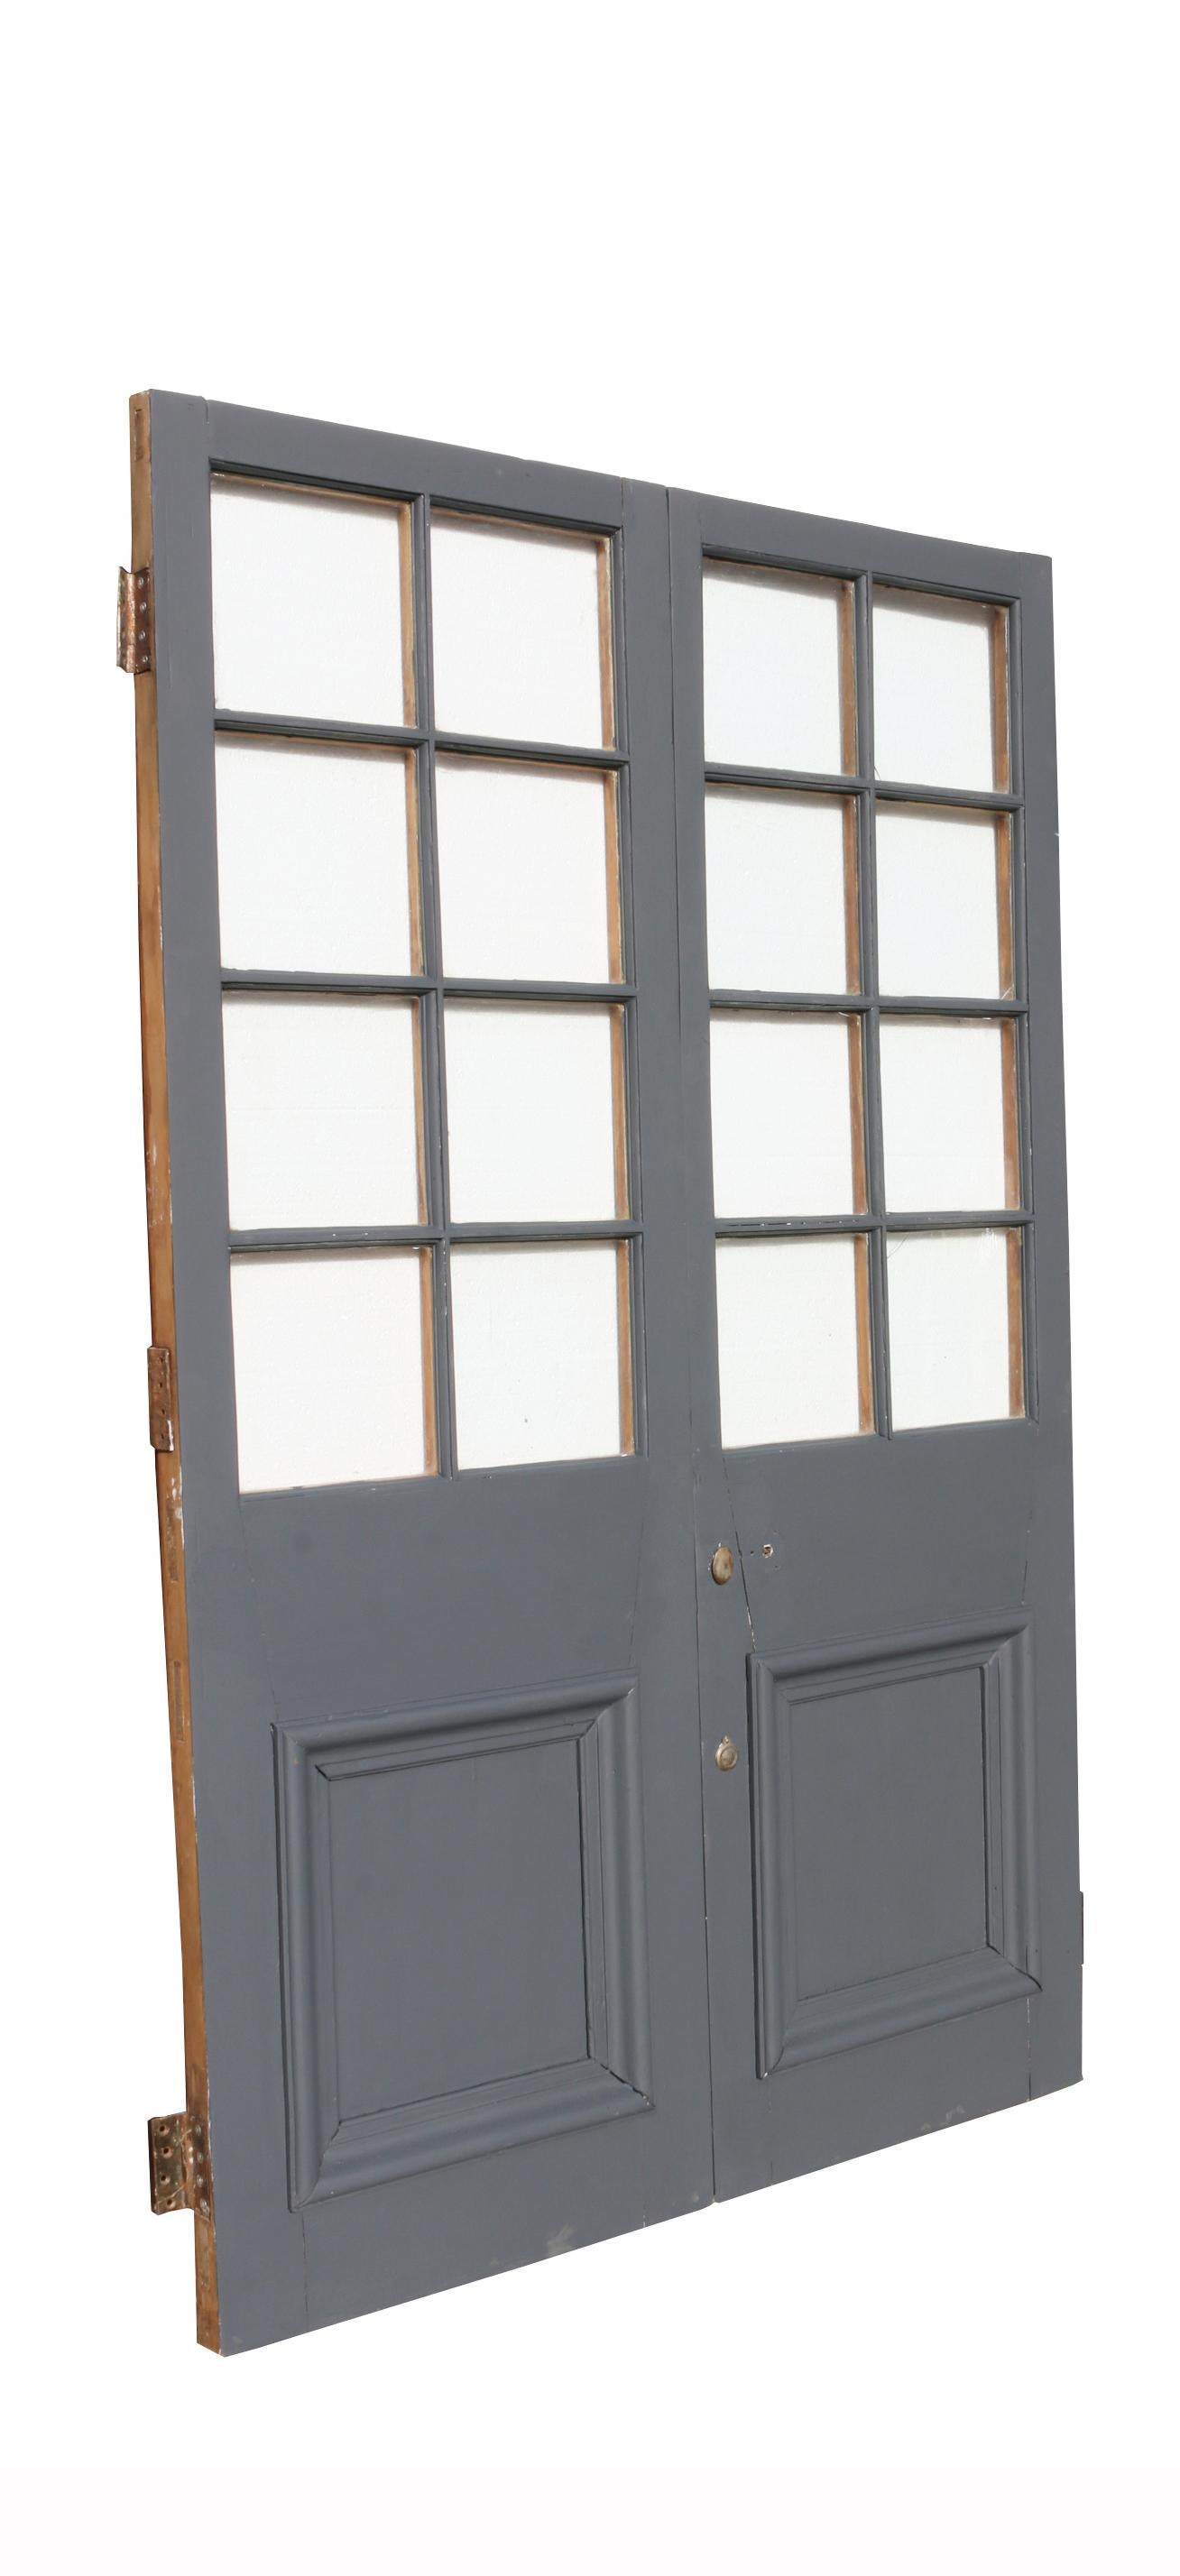 These doors have been painted on one side in a grey primer and feature single glazing. They are in good condition for their age, but do have four cracks to the glass.

Measures: Height 197.5 cm

Width 124.5 cm

Depth 5 cm

Weight 45 kg (for